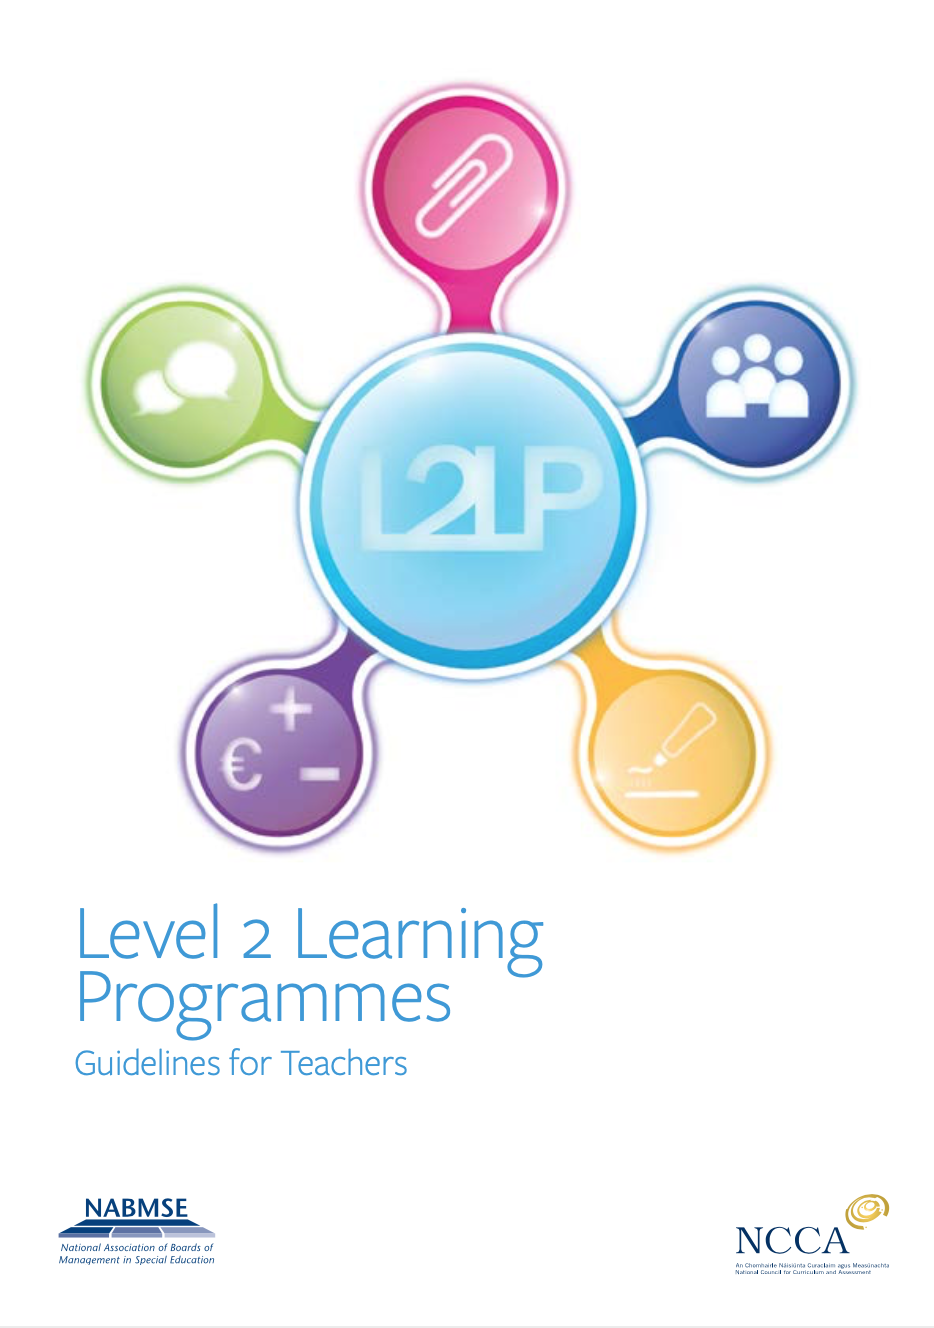 Level 2 Learning Programmes (L2LPs) Guidelines